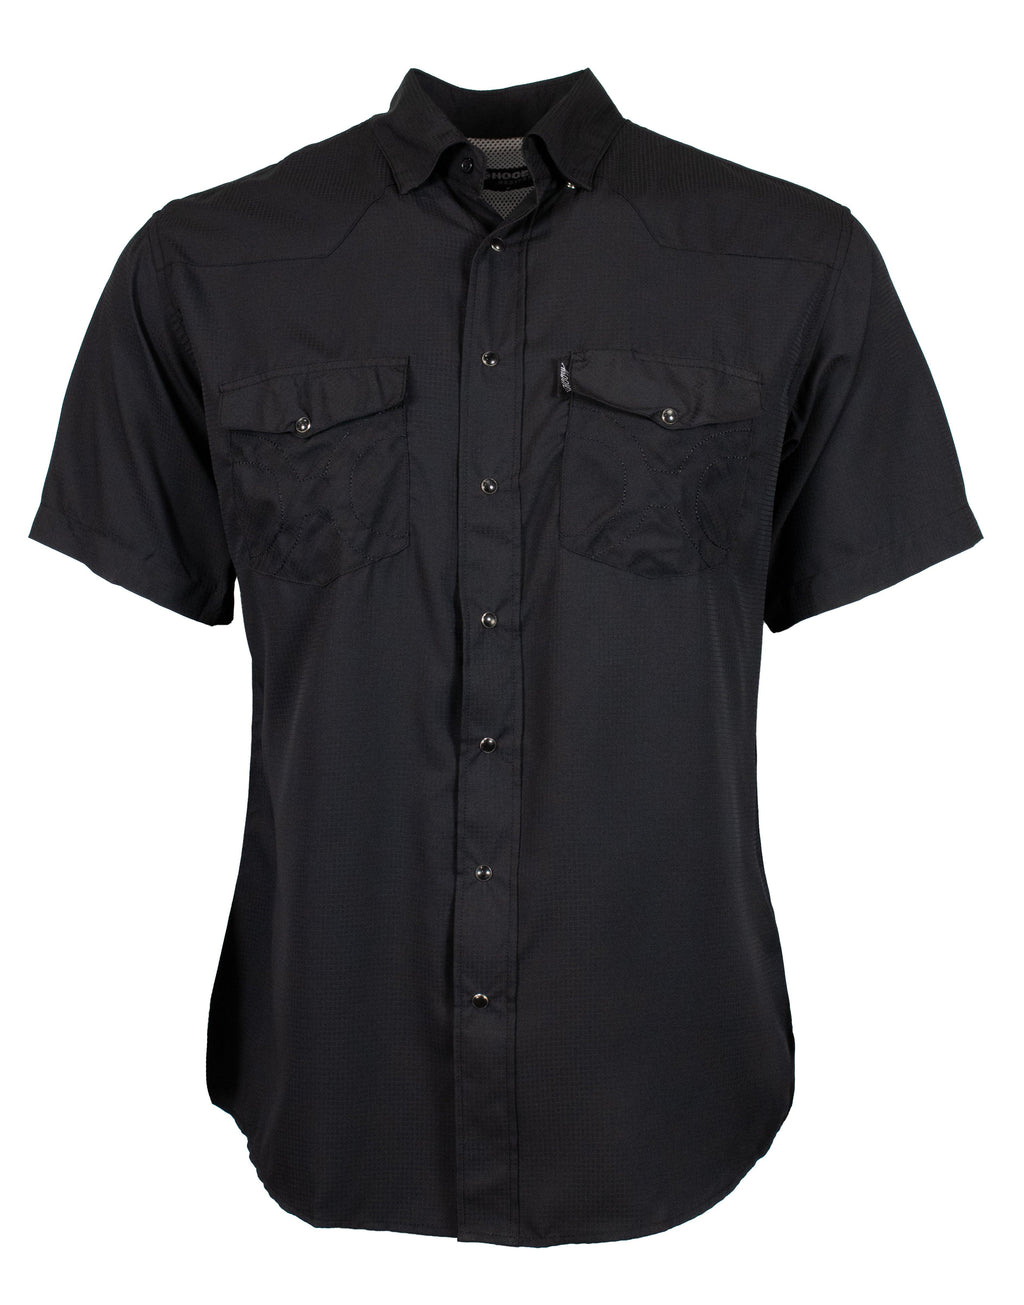 AR Pearl Snap Short Sleeve - Black/Grey – Rock City Outfitters